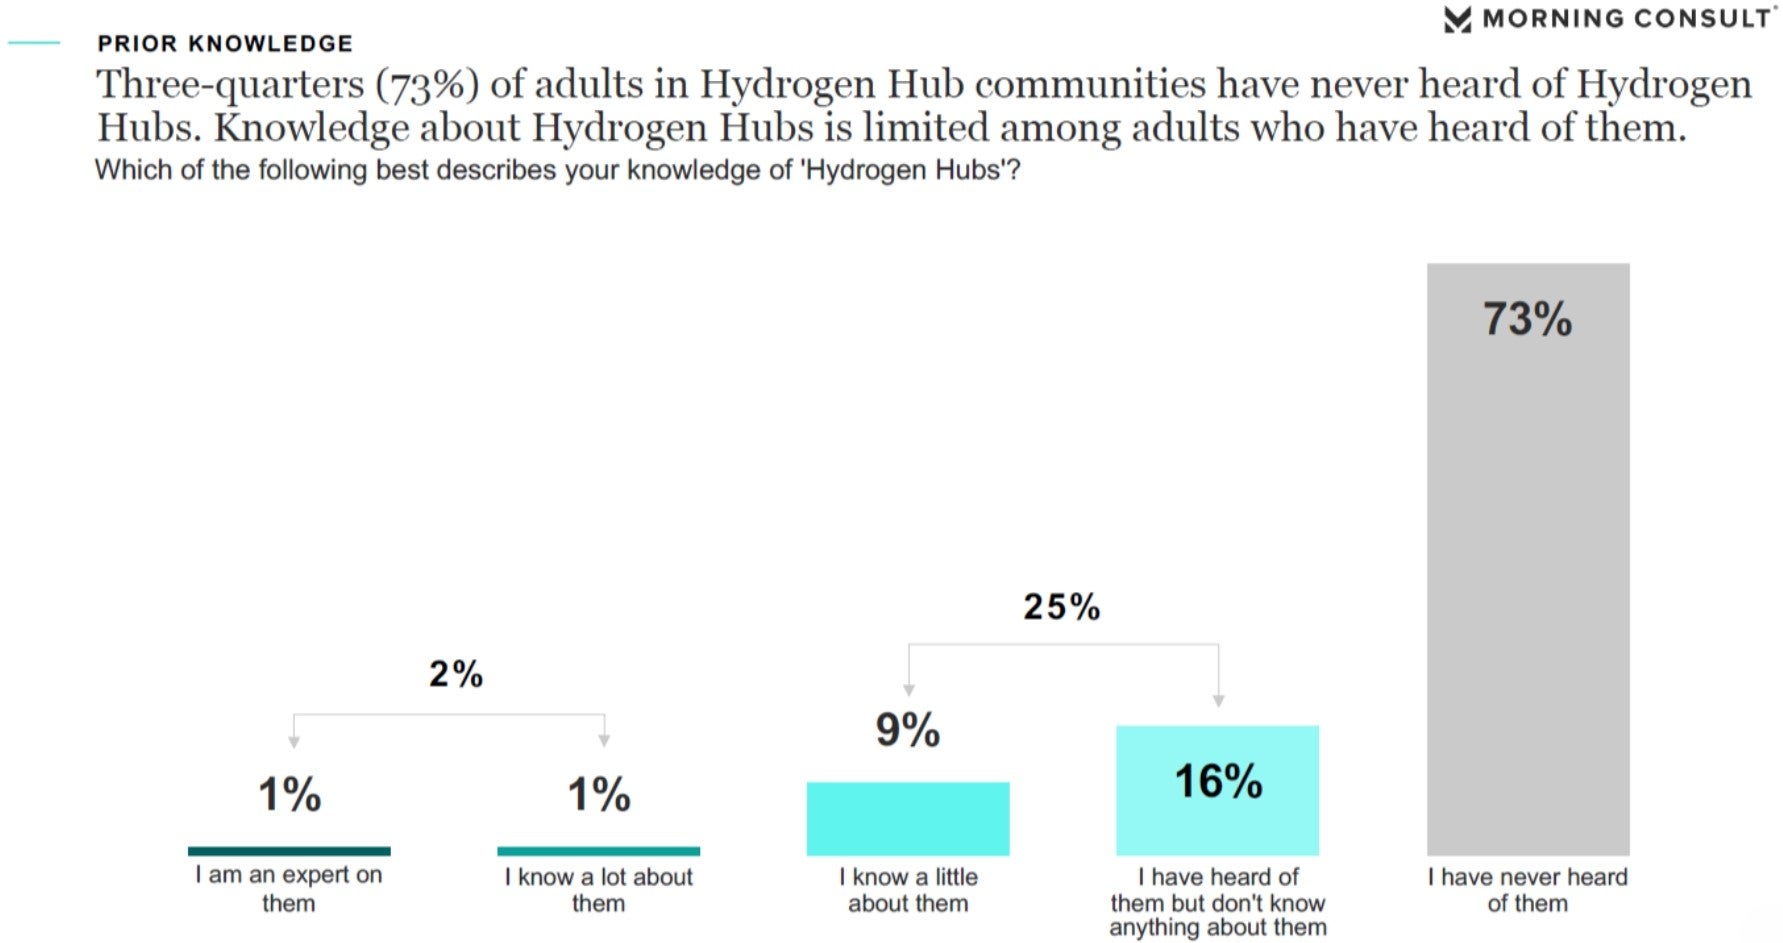 73% of adults in Hydrogen Hub communities have never heard of them.